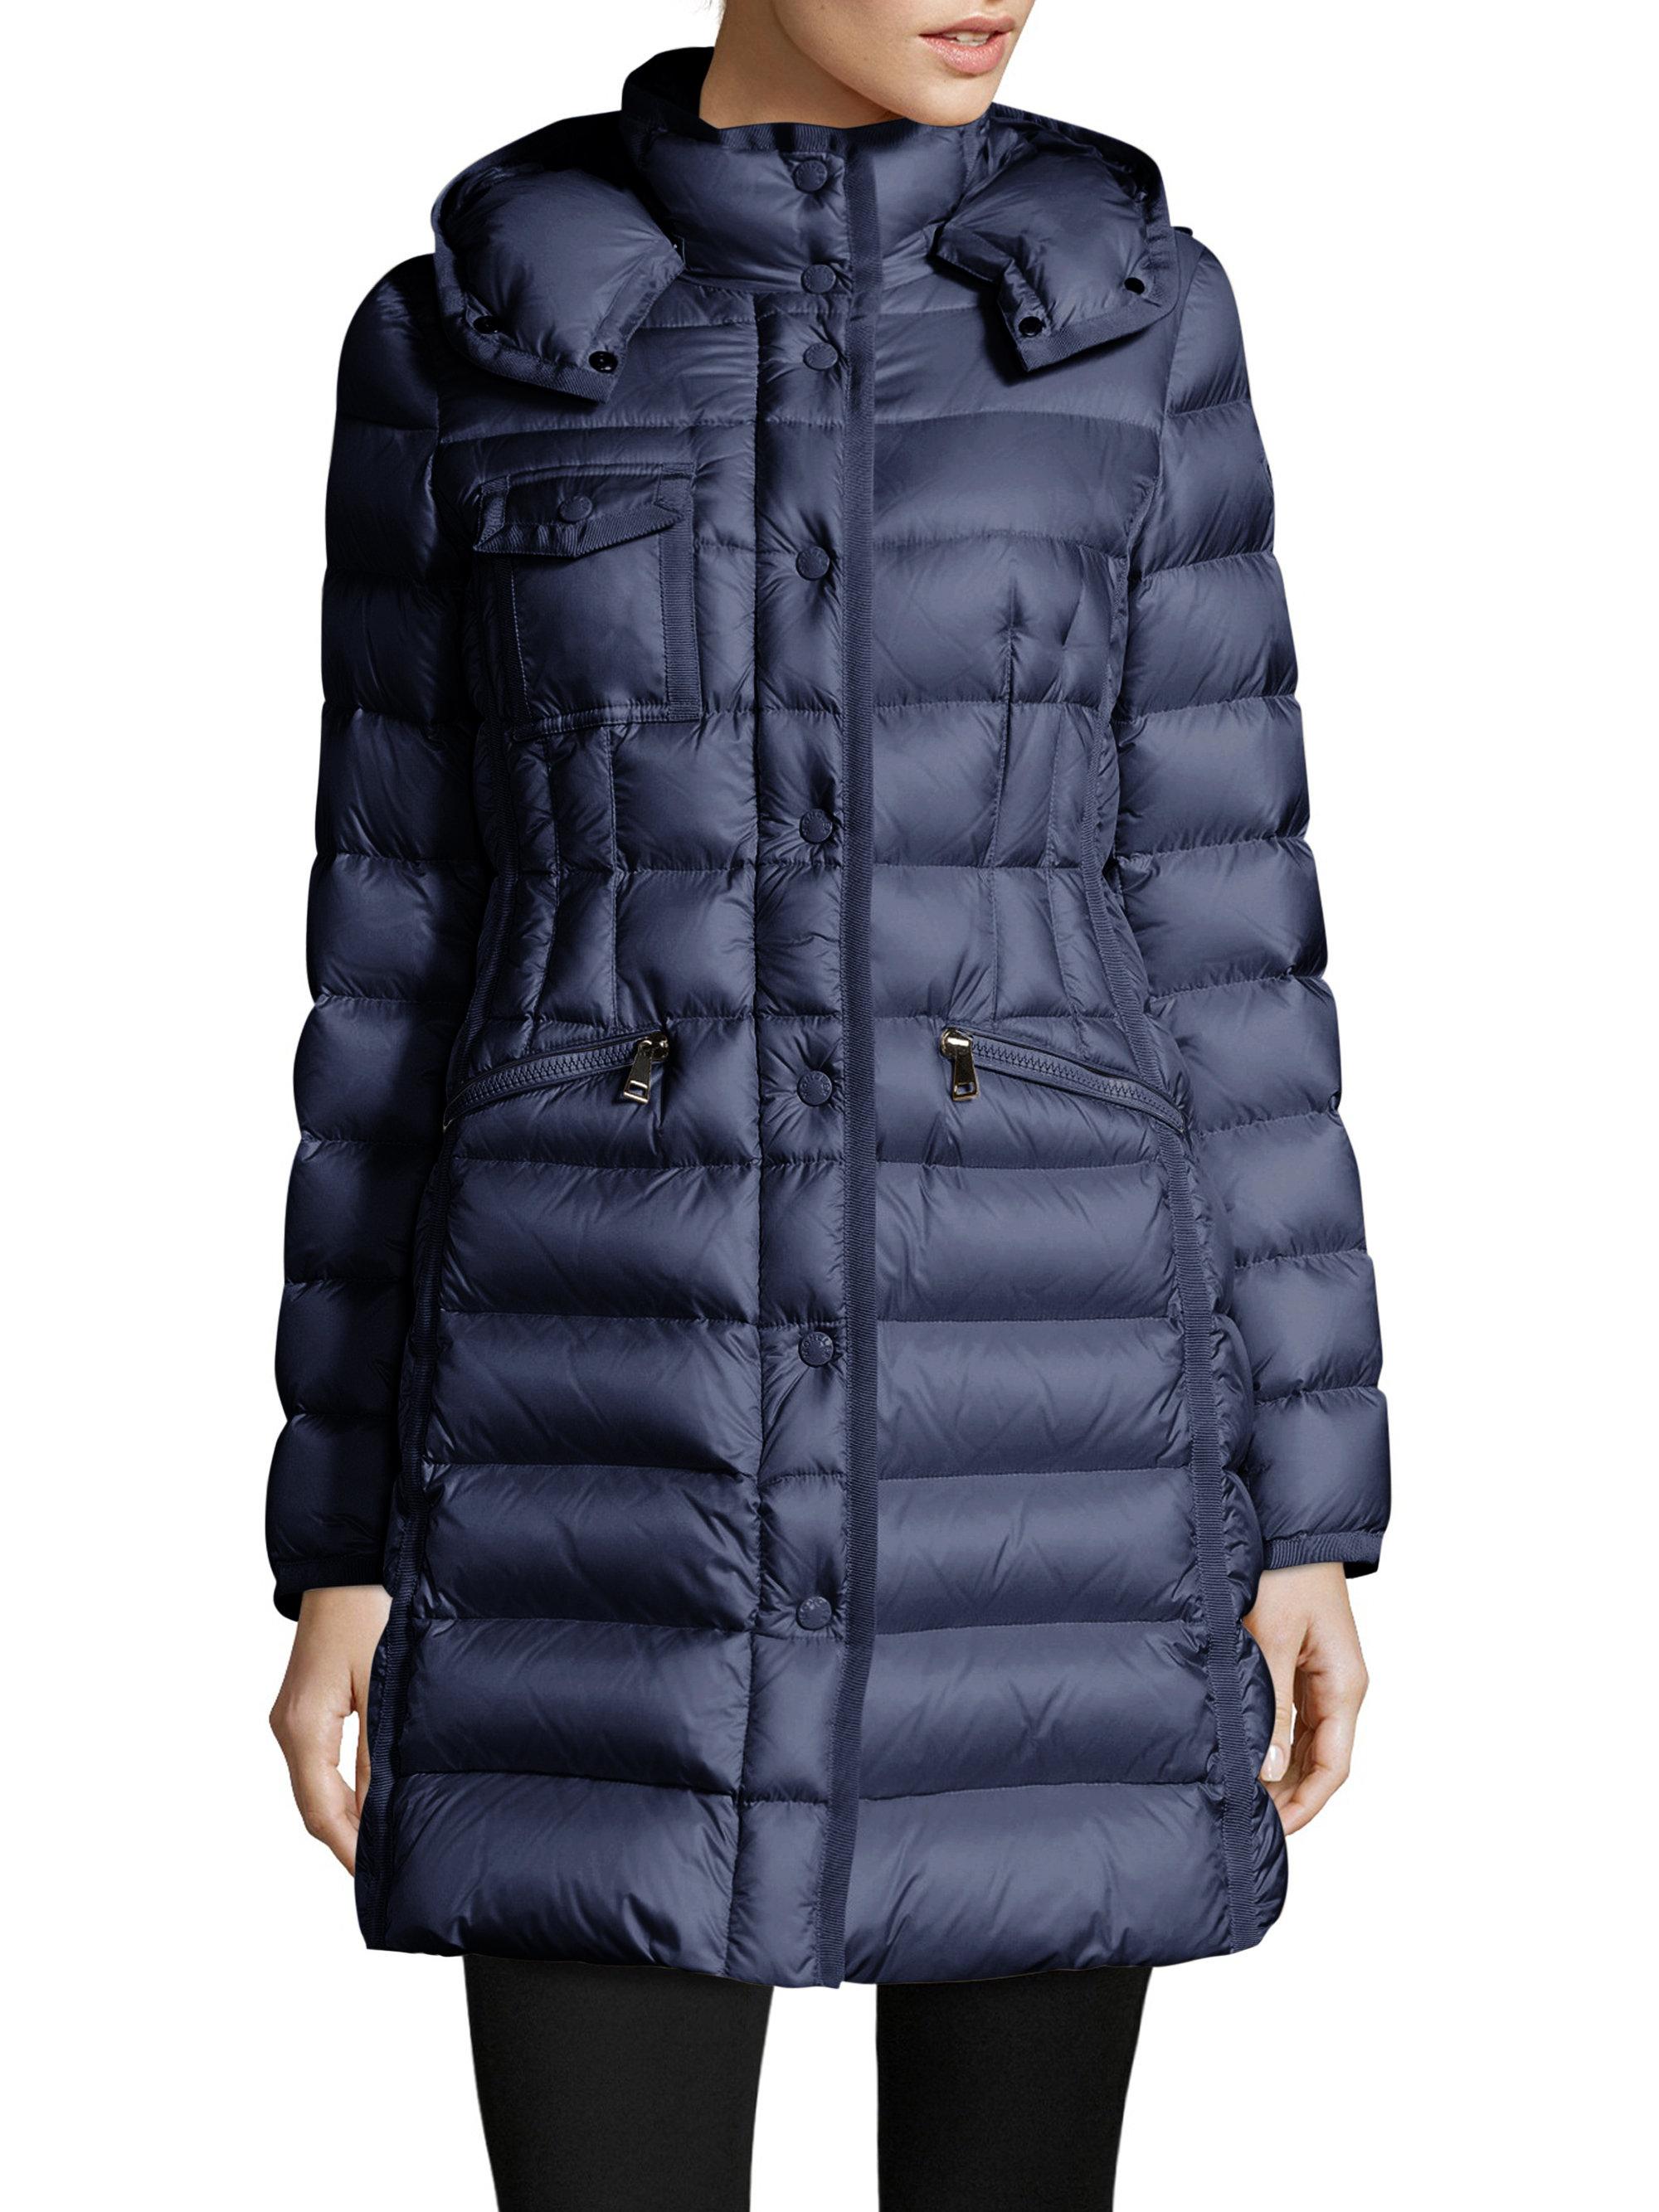 Lyst - Moncler Hermine Puffer Jacket in Blue